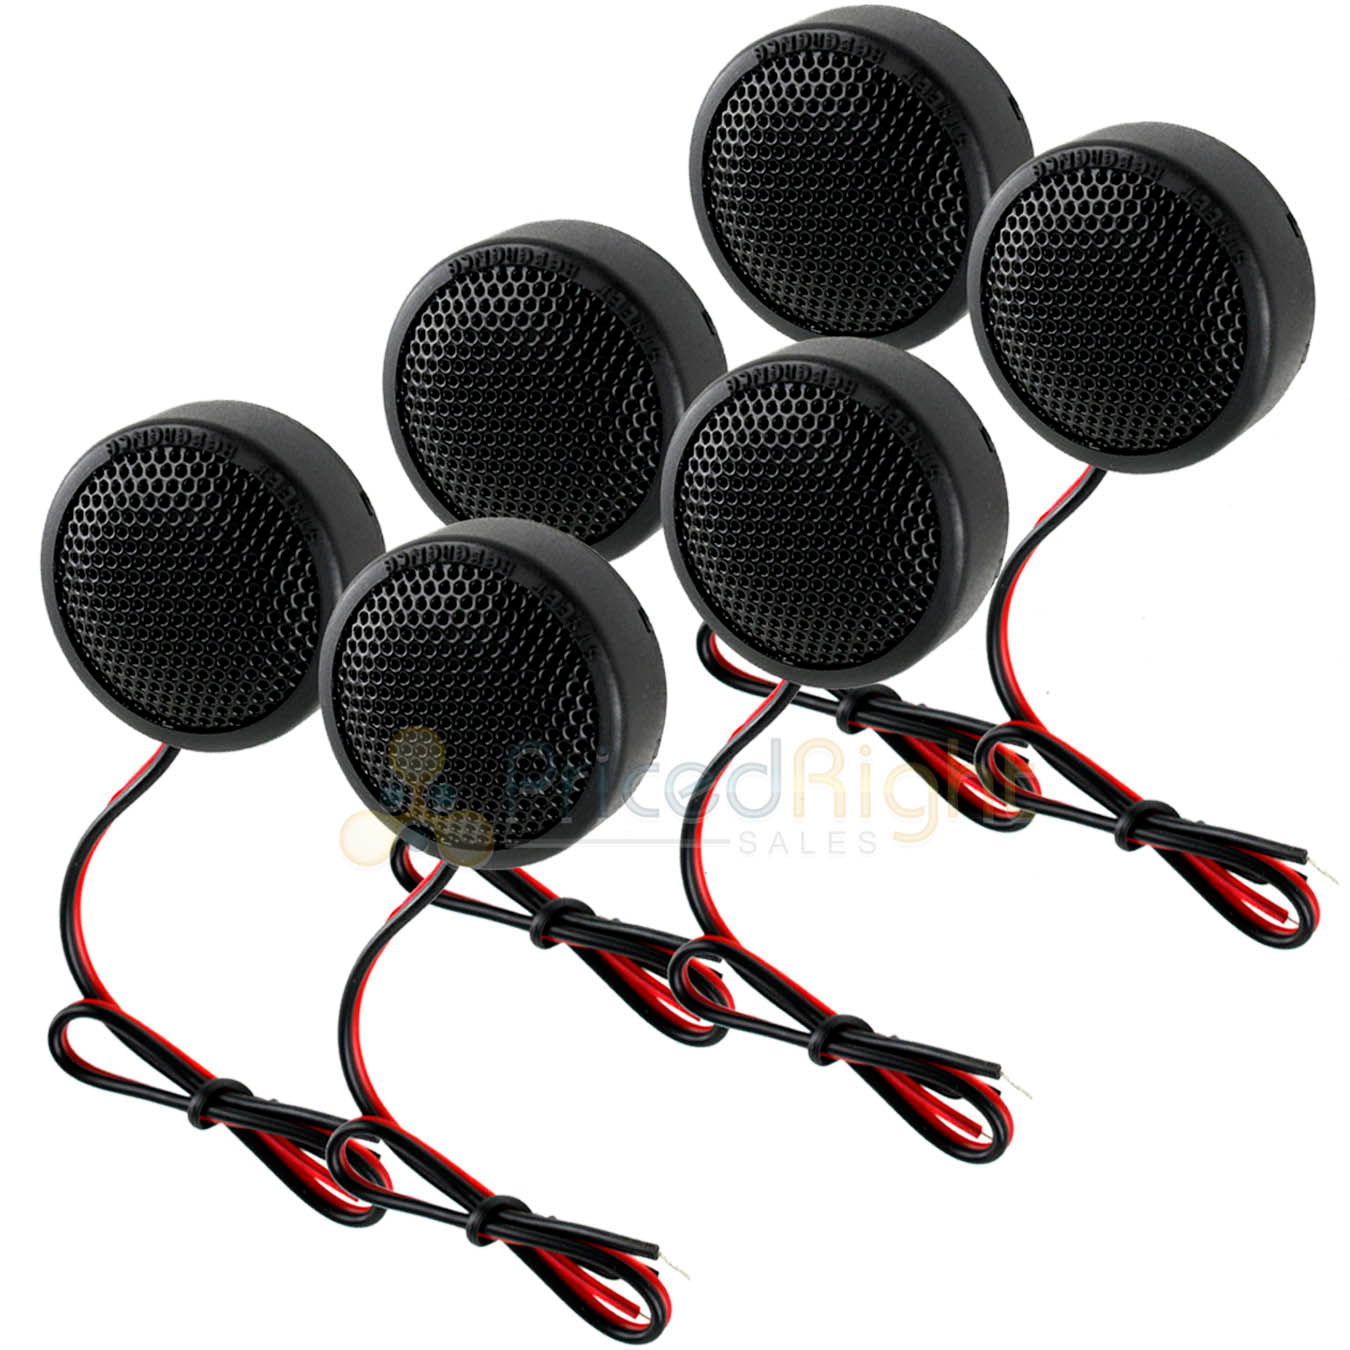 6 Memphis Audio 1" Soft Dome Tweeters 120 Watts Max Each Street Reference SRX1